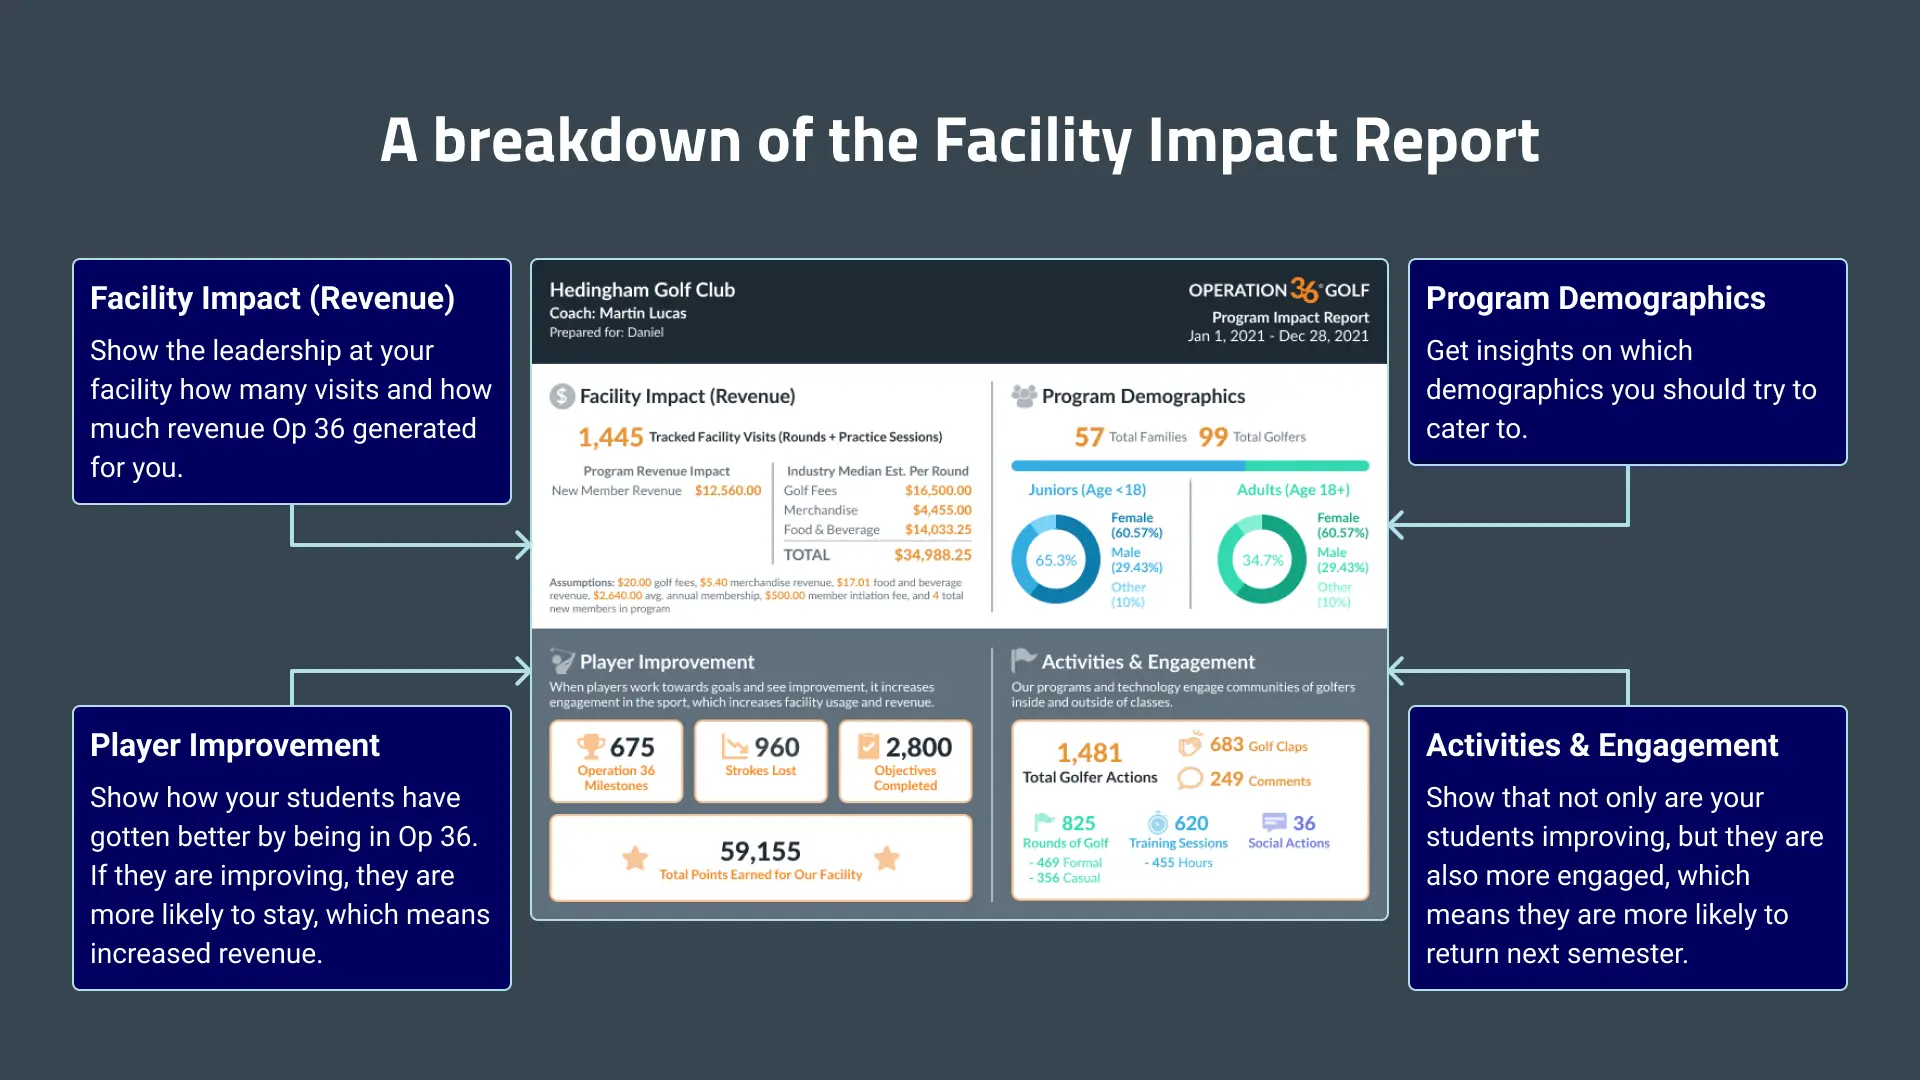 Breakdown of the Facility Impact Report.